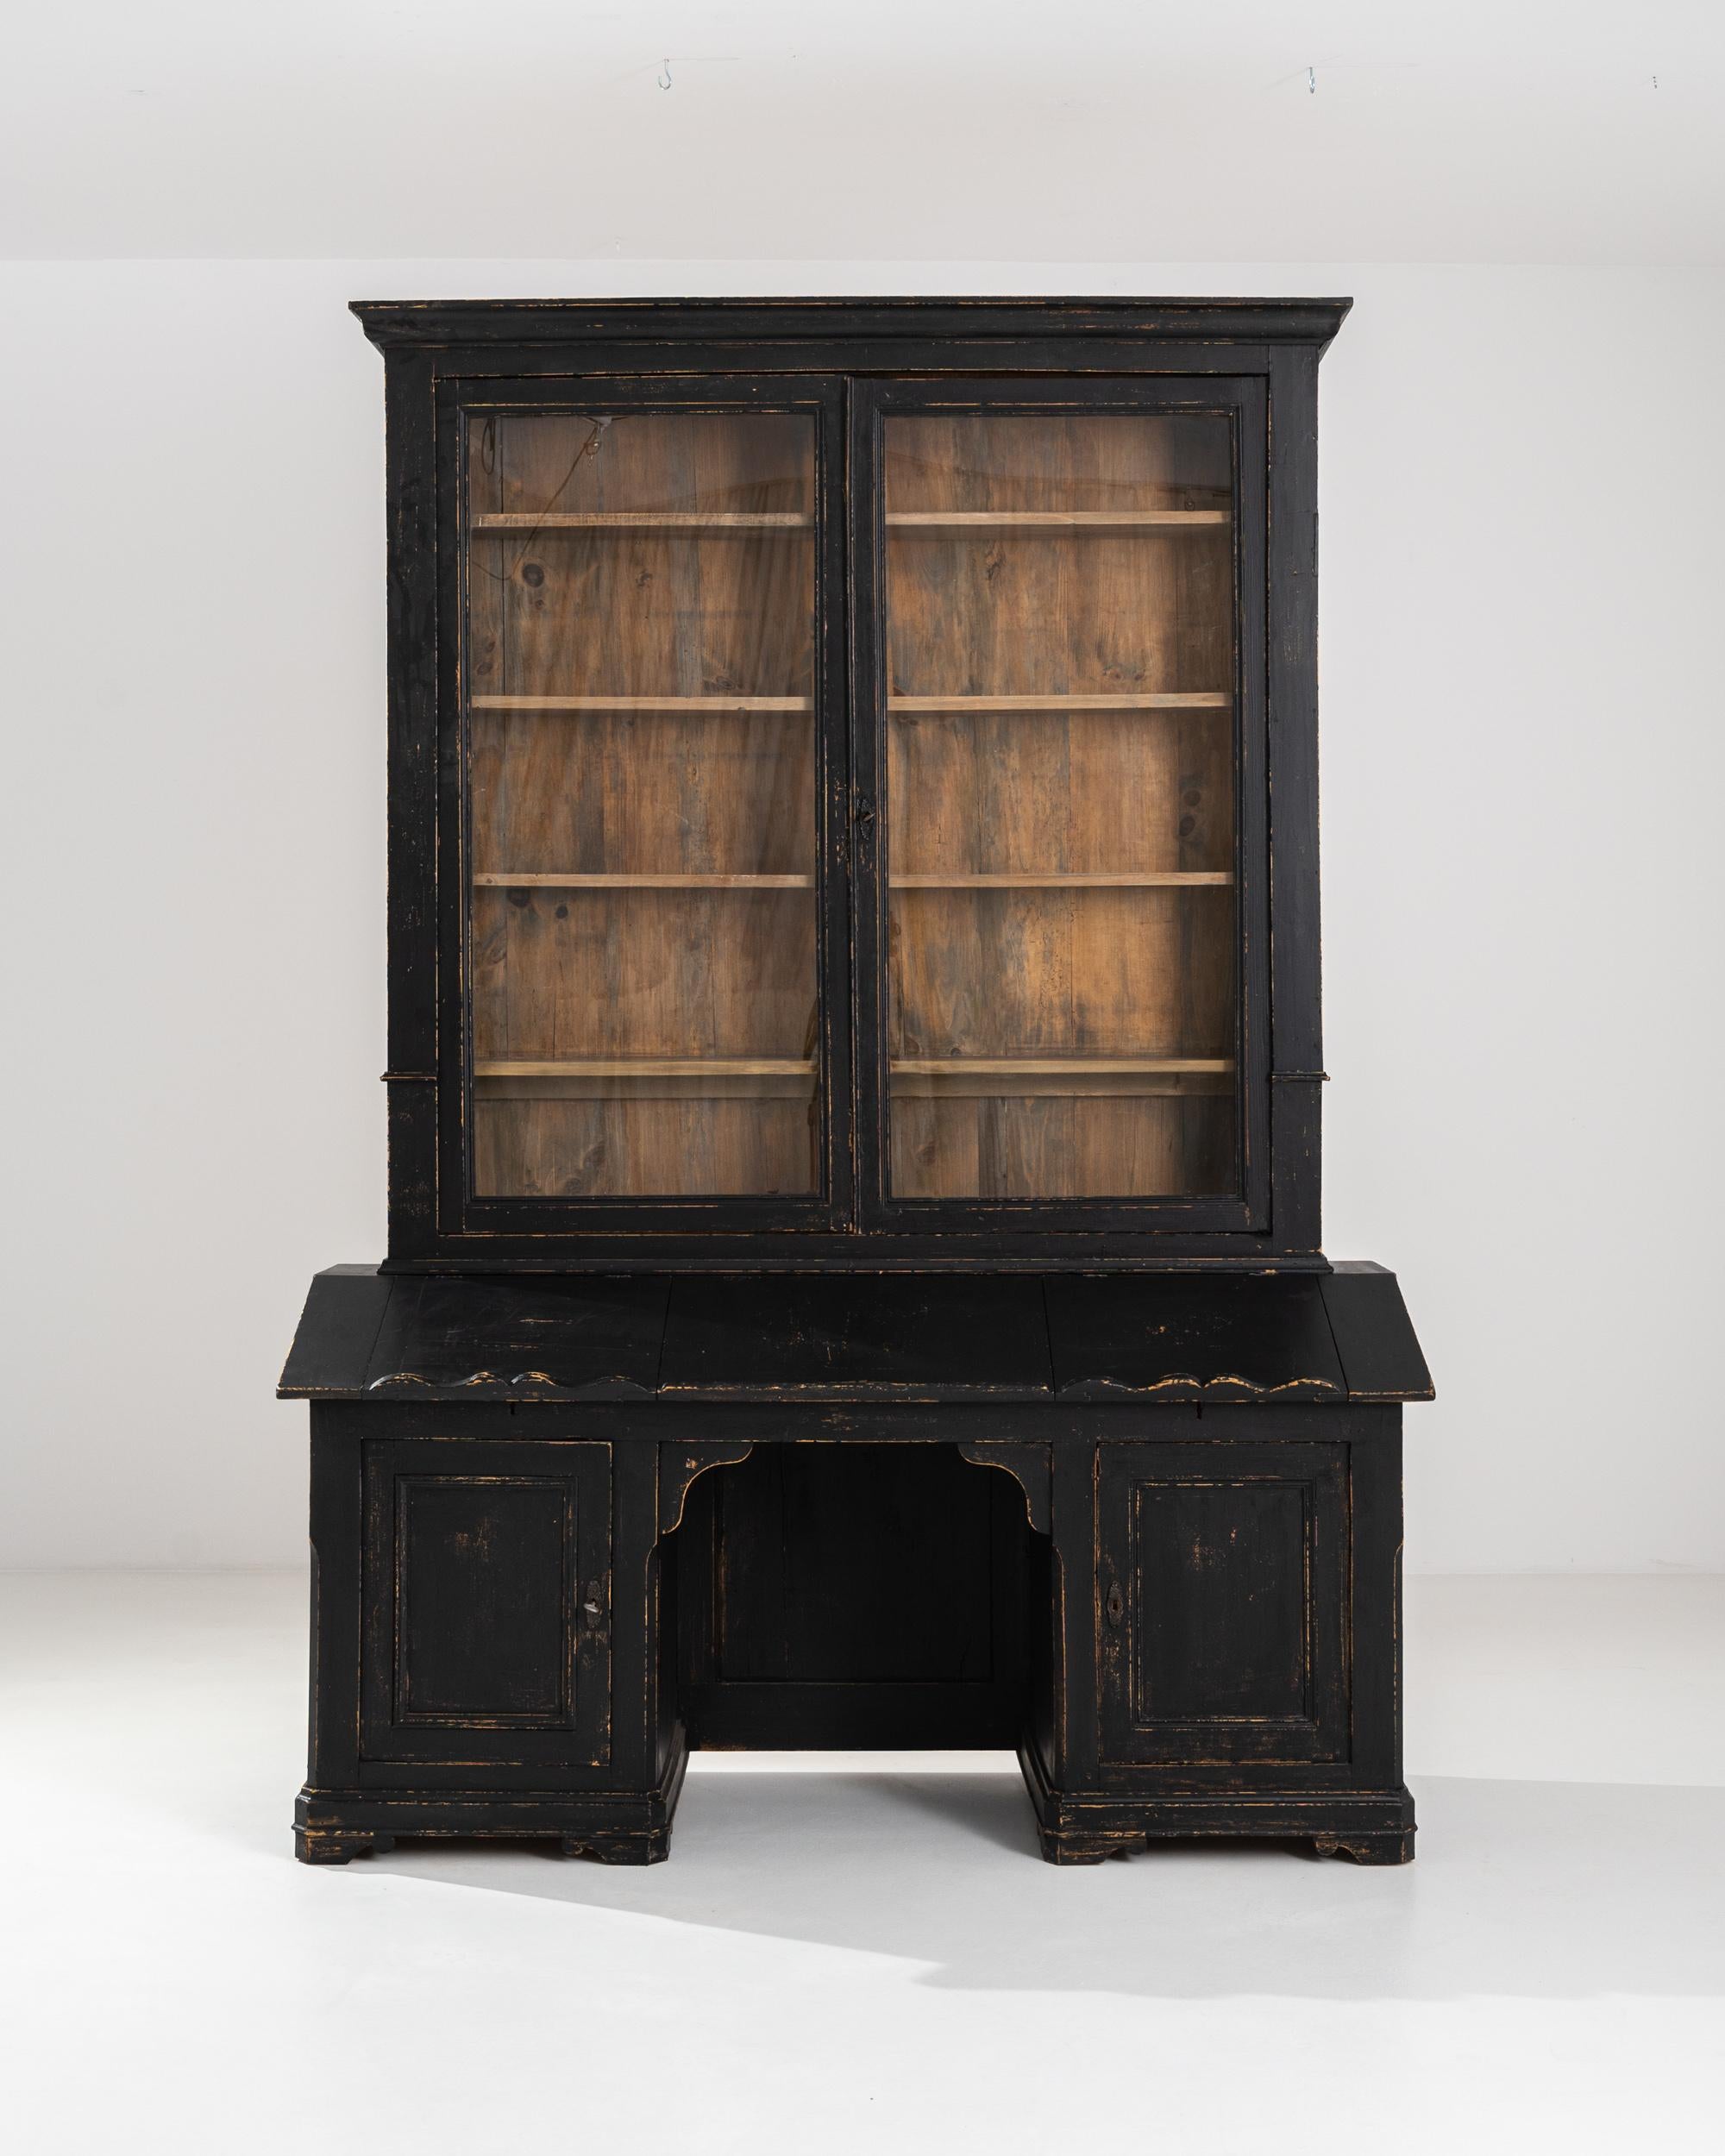 A vintage wooden vitrine from 19th century France. A gentle giant, this glass display case stands tall, emitting a powerful yet inviting ambience. Five large upper shelves offer a wealth of storage for inspiring curiosities, while two symmetrical